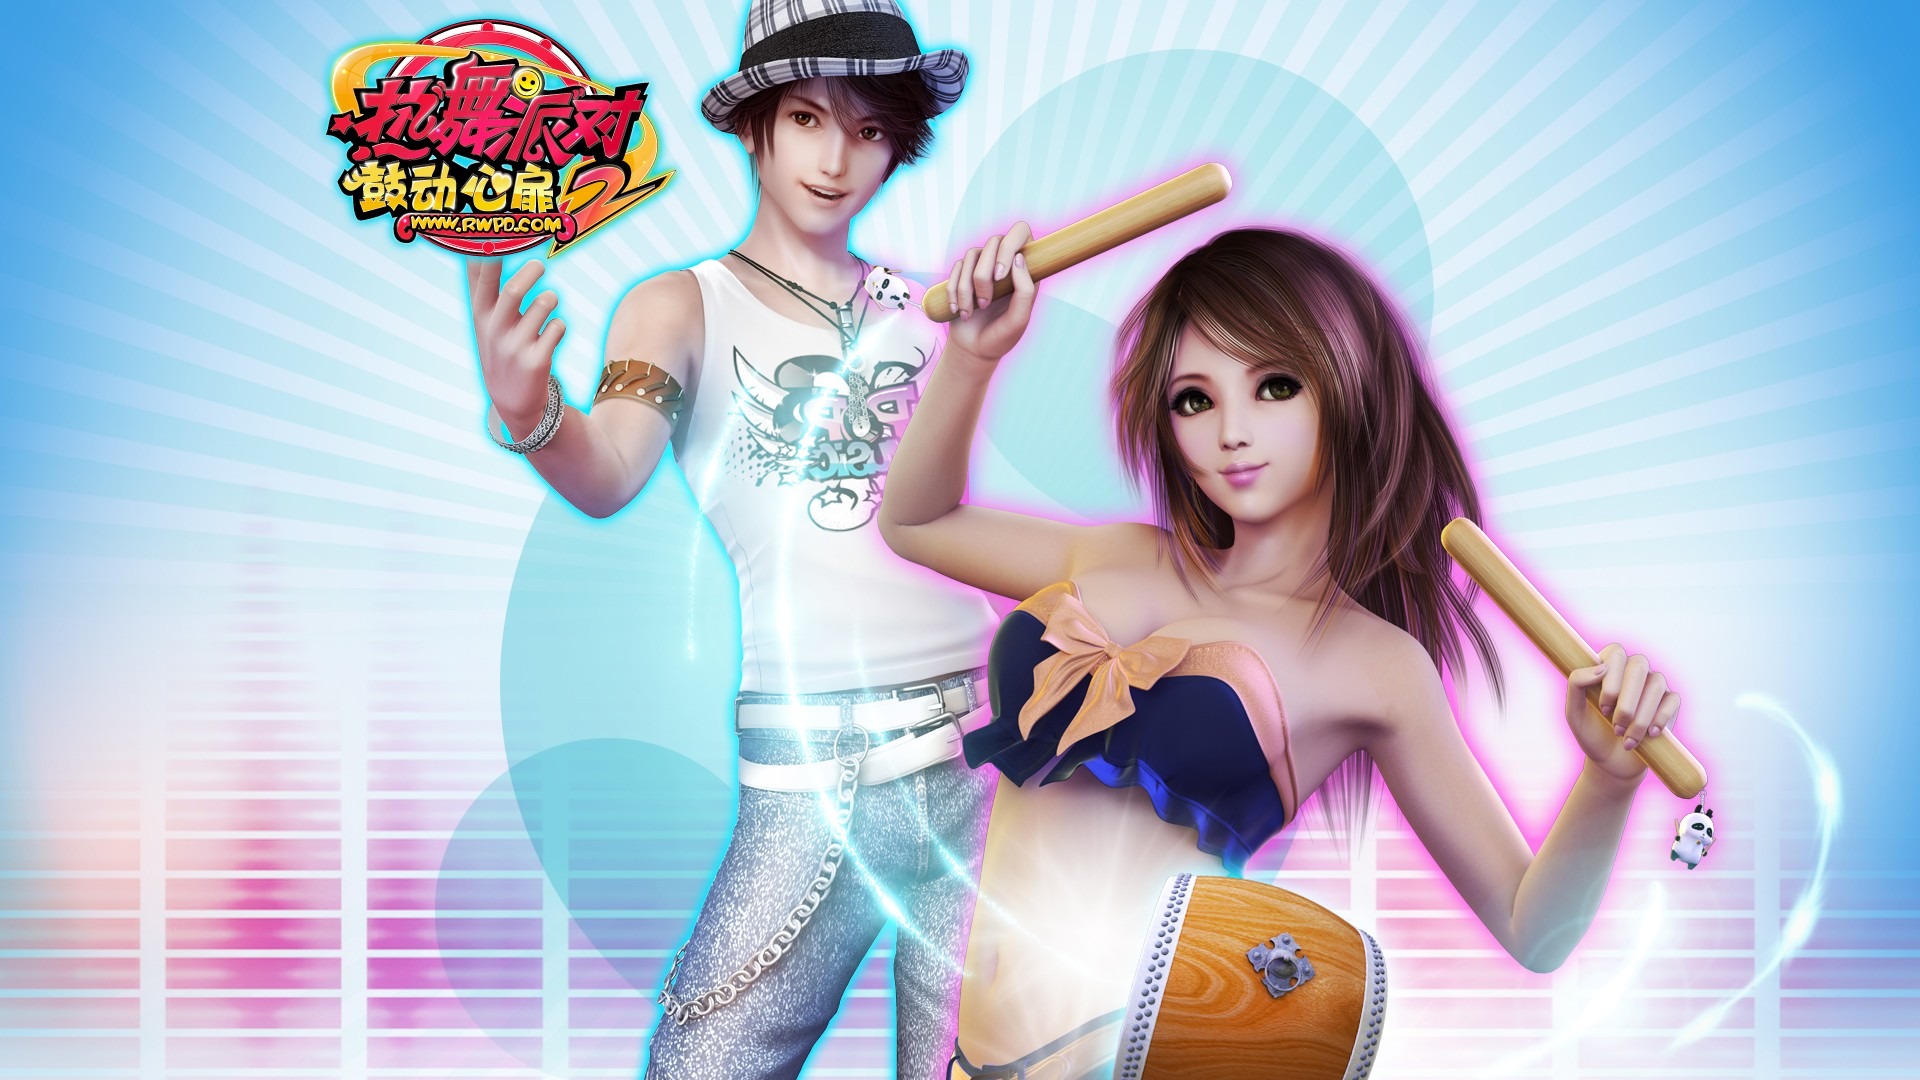 Online game Hot Dance Party II official wallpapers #14 - 1920x1080